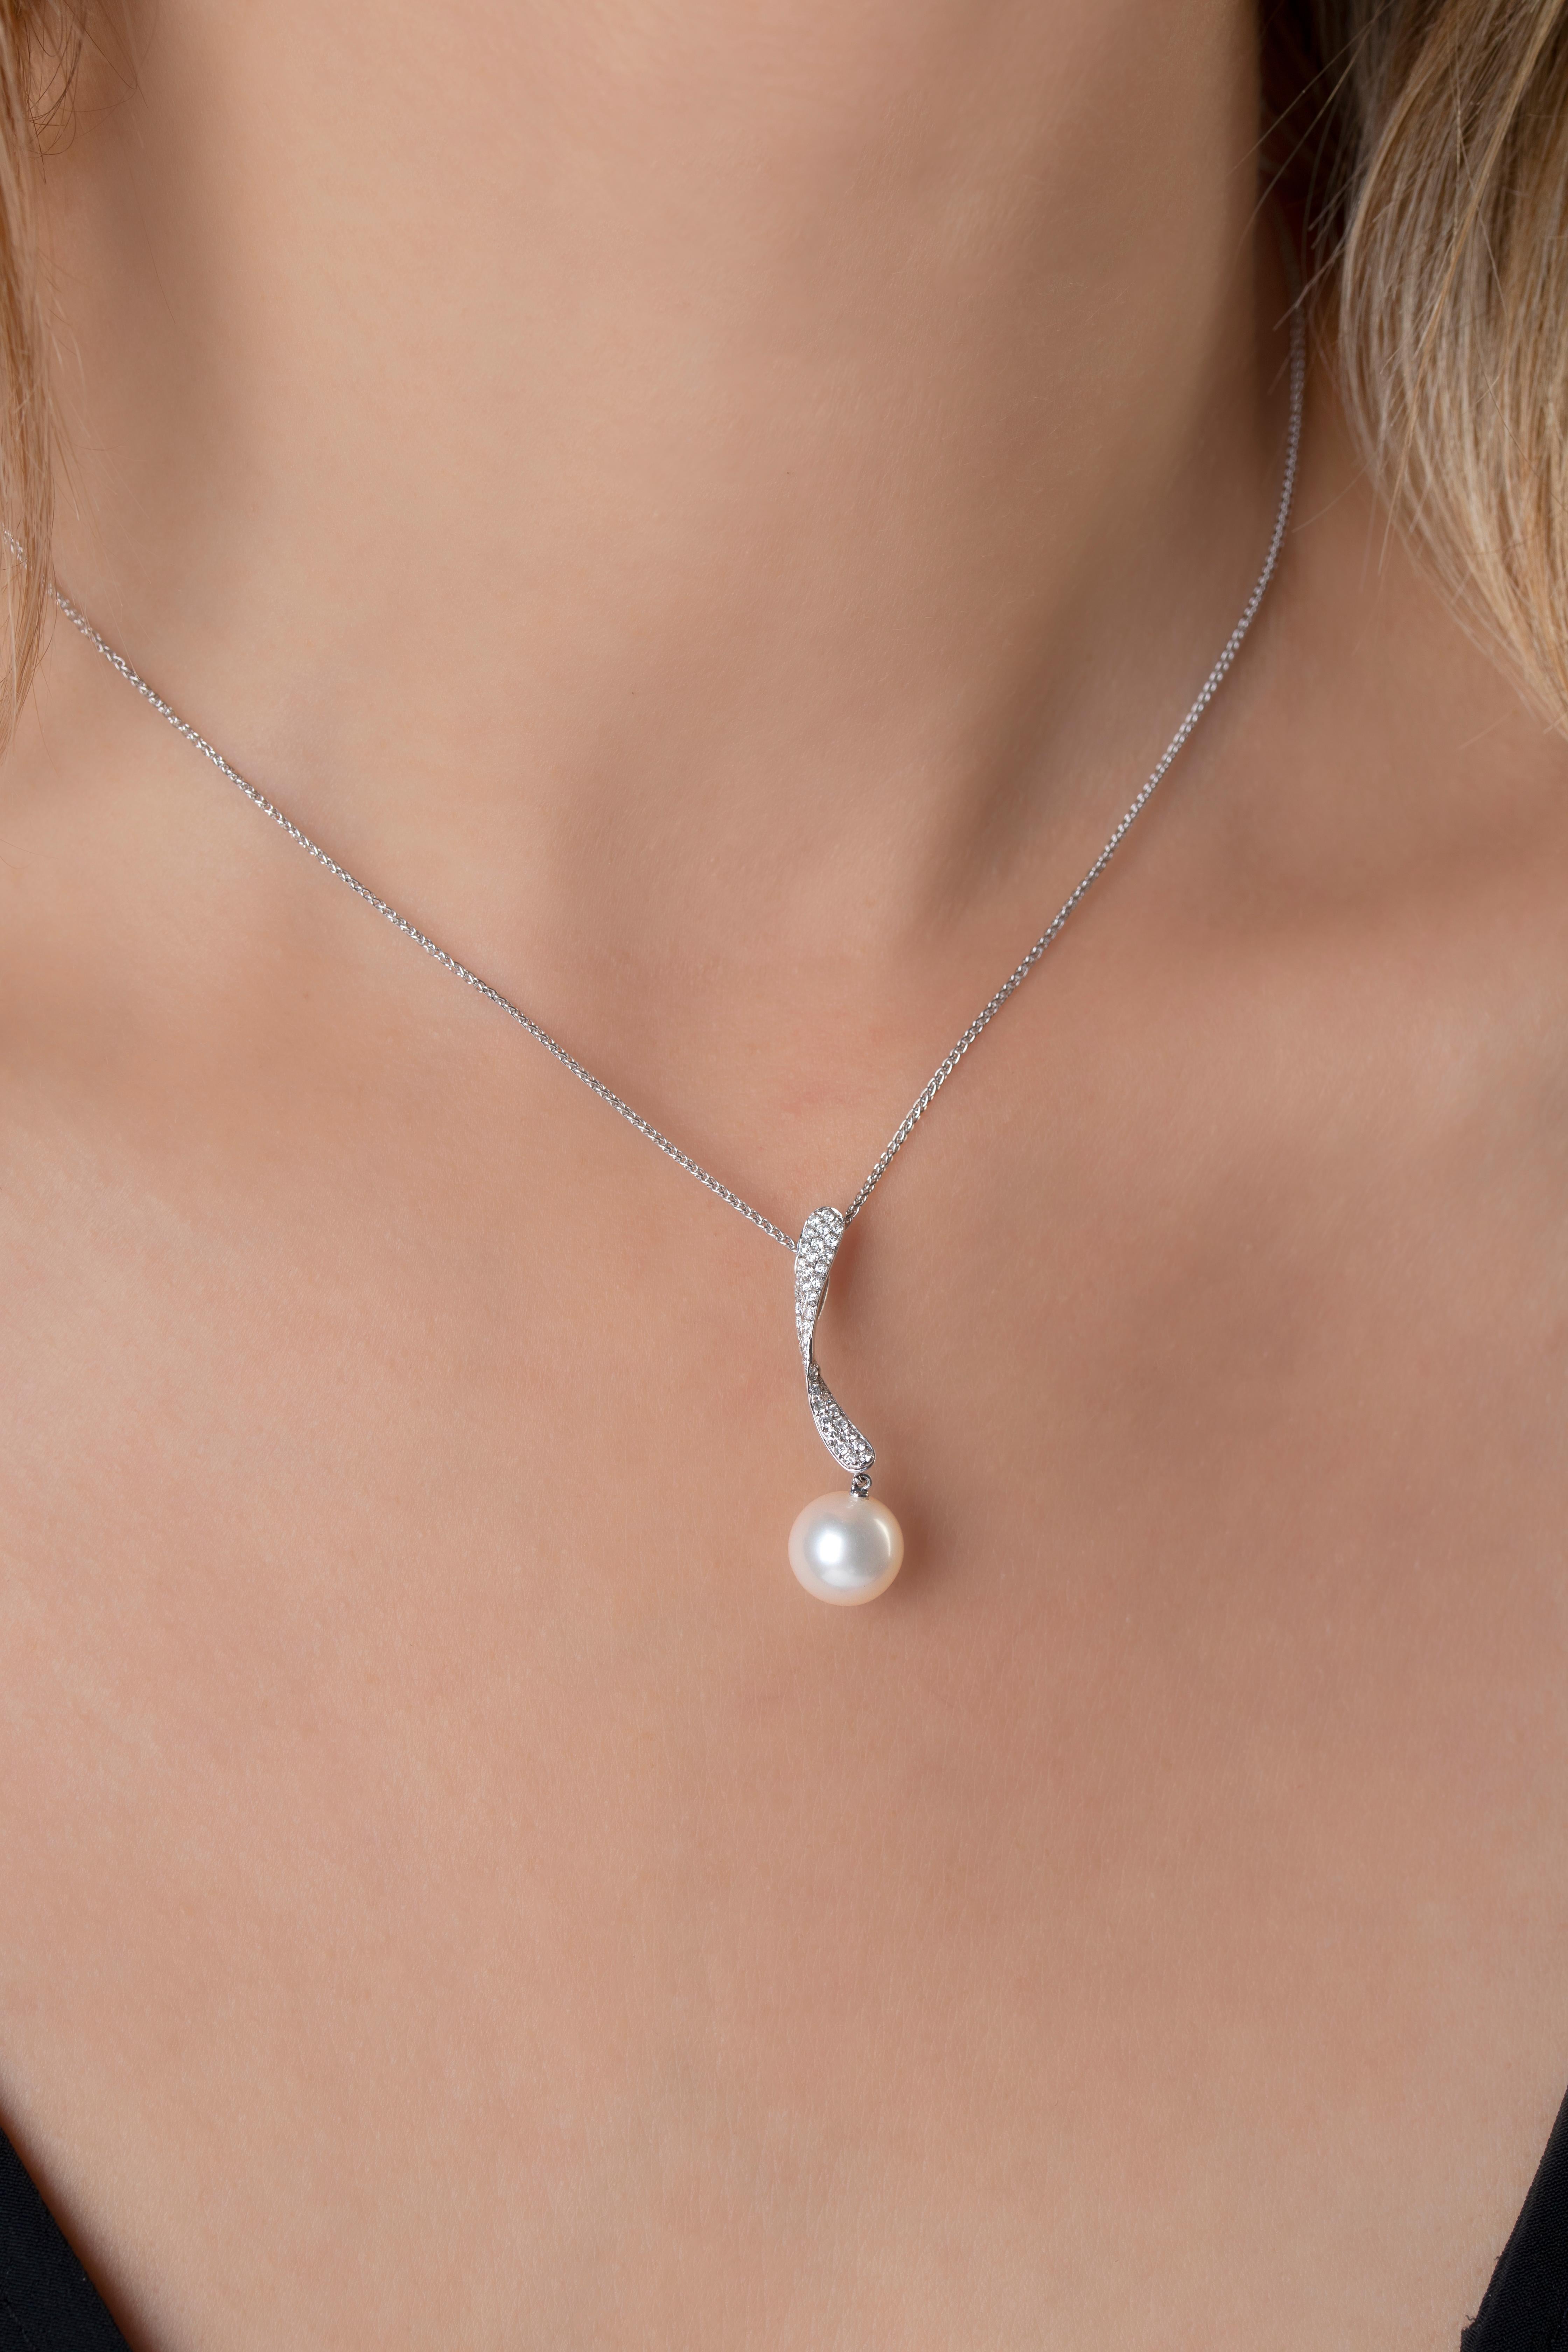 This elegant pendant by Yoko London features a lustrous 9-9.5mm Freshwater pearl beneath an elegant diamond twist. Perfect for both day and evening wear, this intricate pendant will add a touch of sophistication to any outfit. 
- 9-9.5mm Freshwater